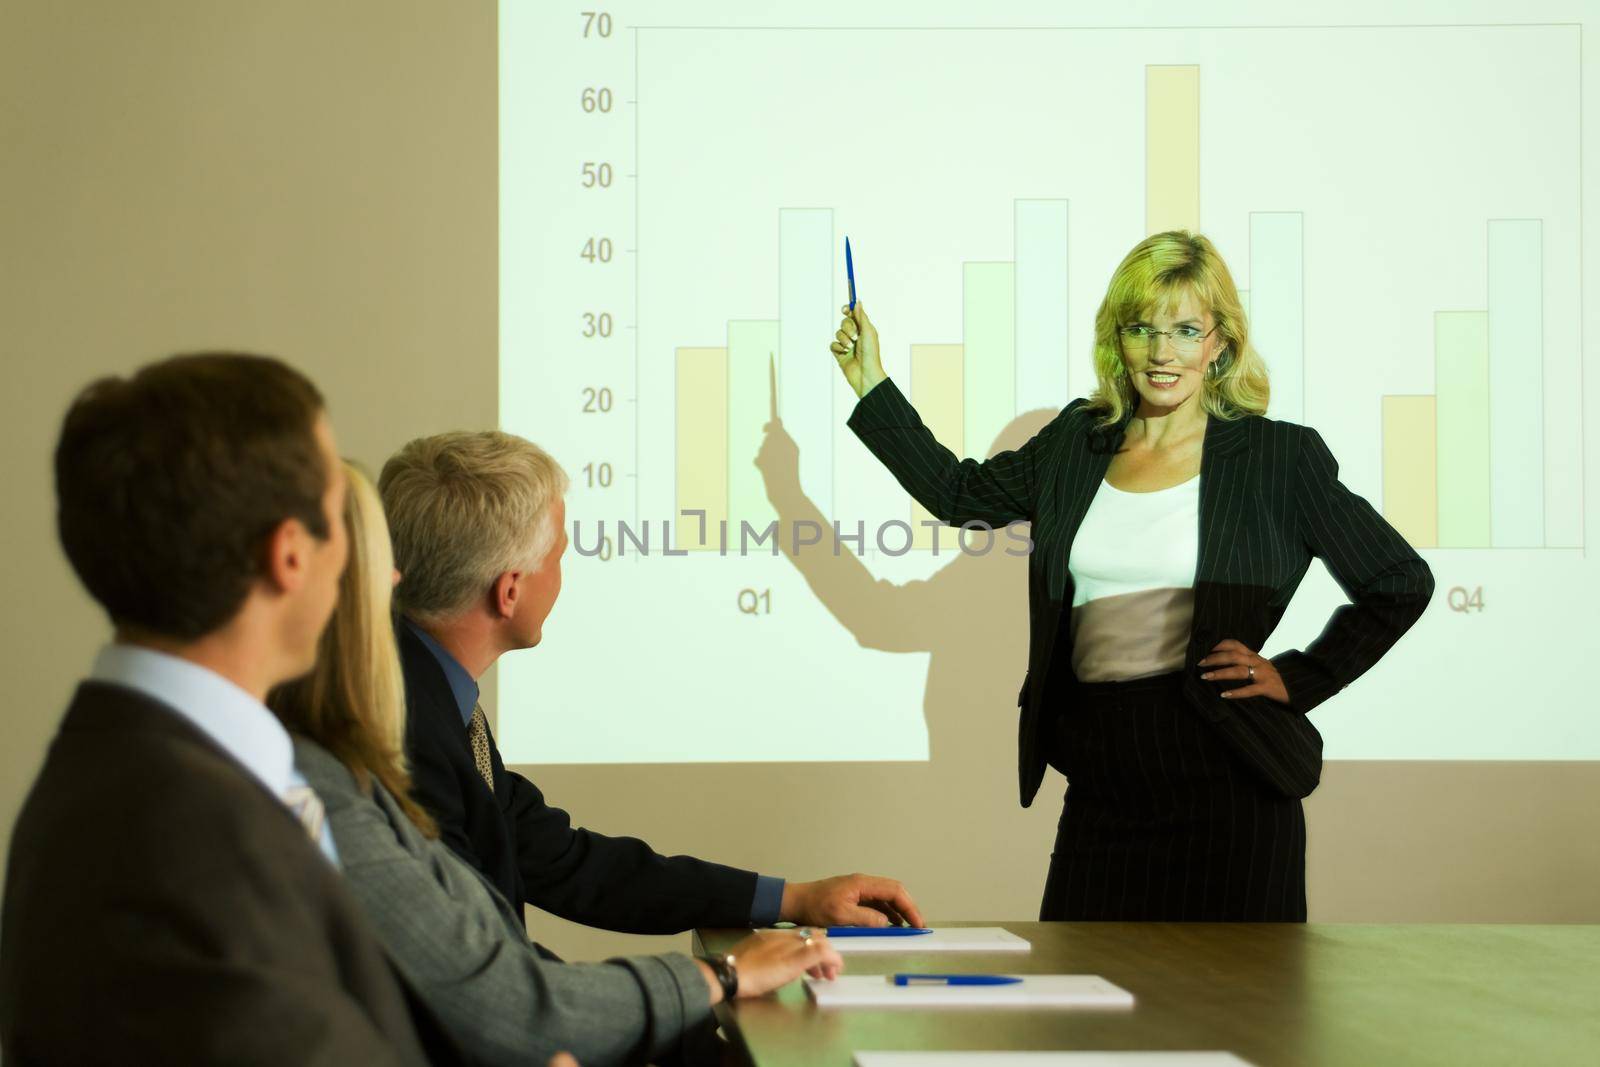 A group of people in a video presentation held by a blond woman